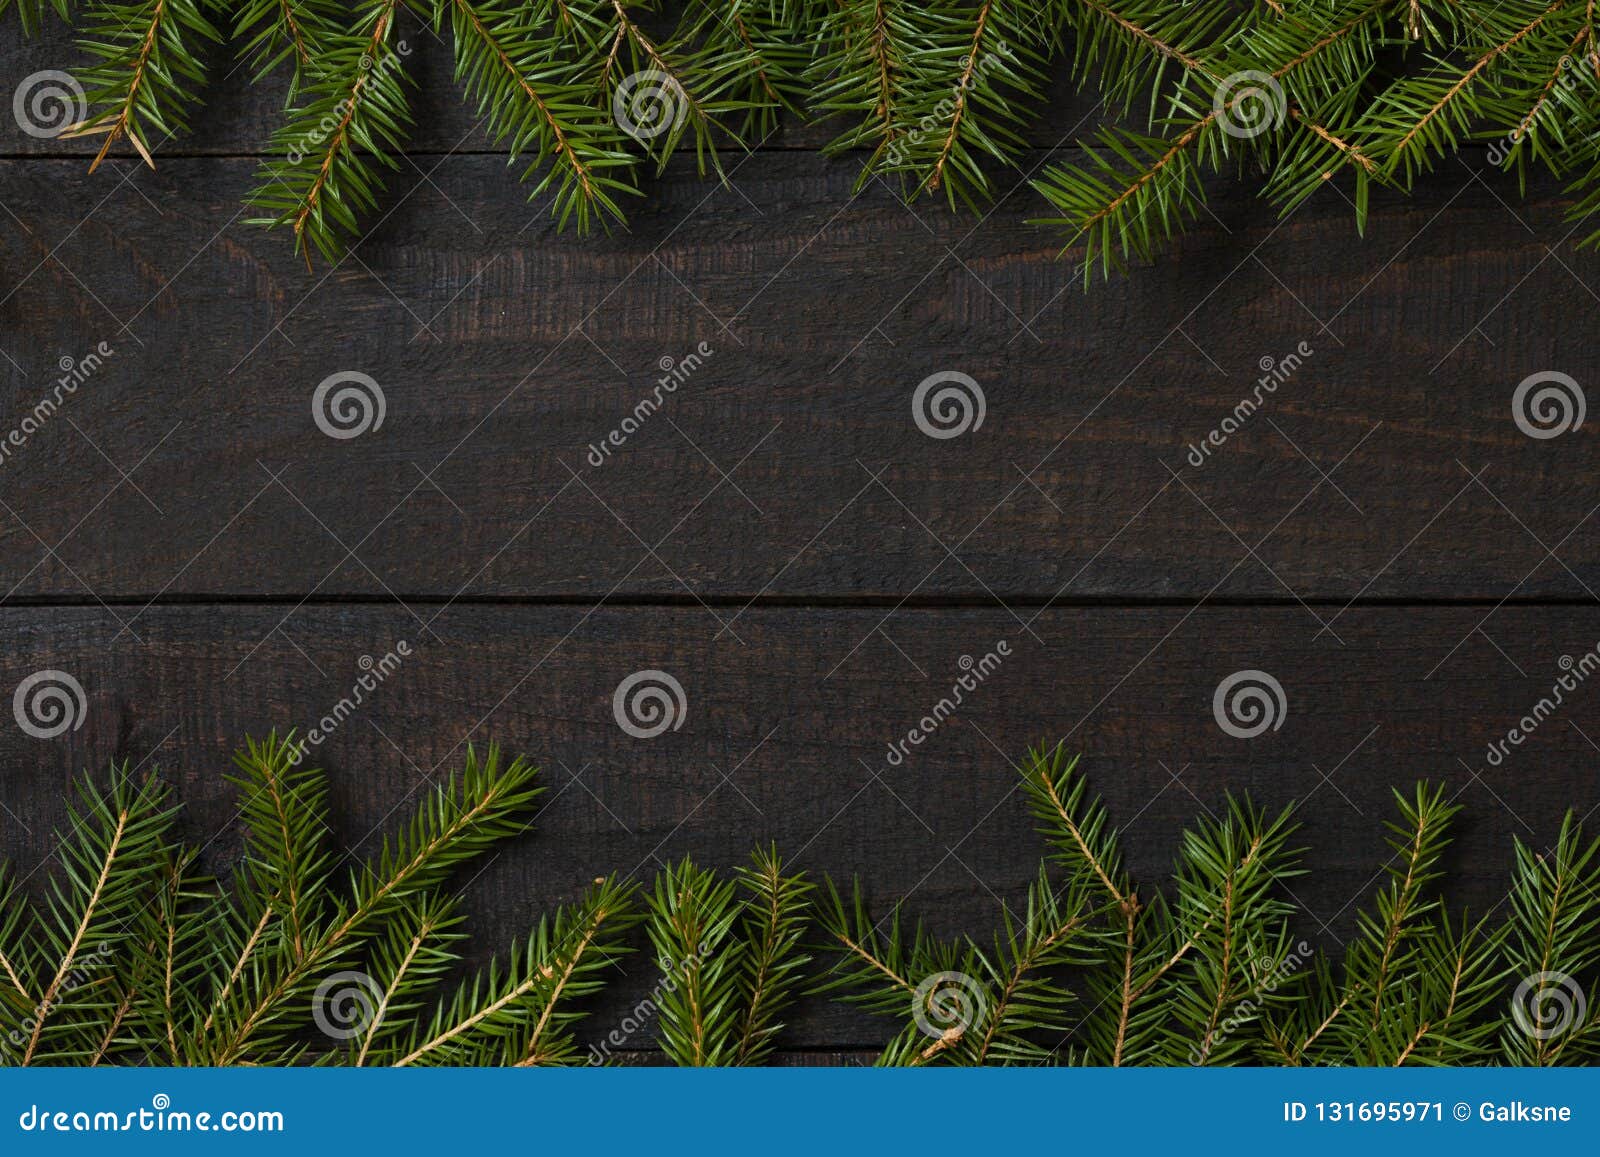 dark rustic wood table flatlay - christmas background with green fir tree branch frame. top view with free space for copy text